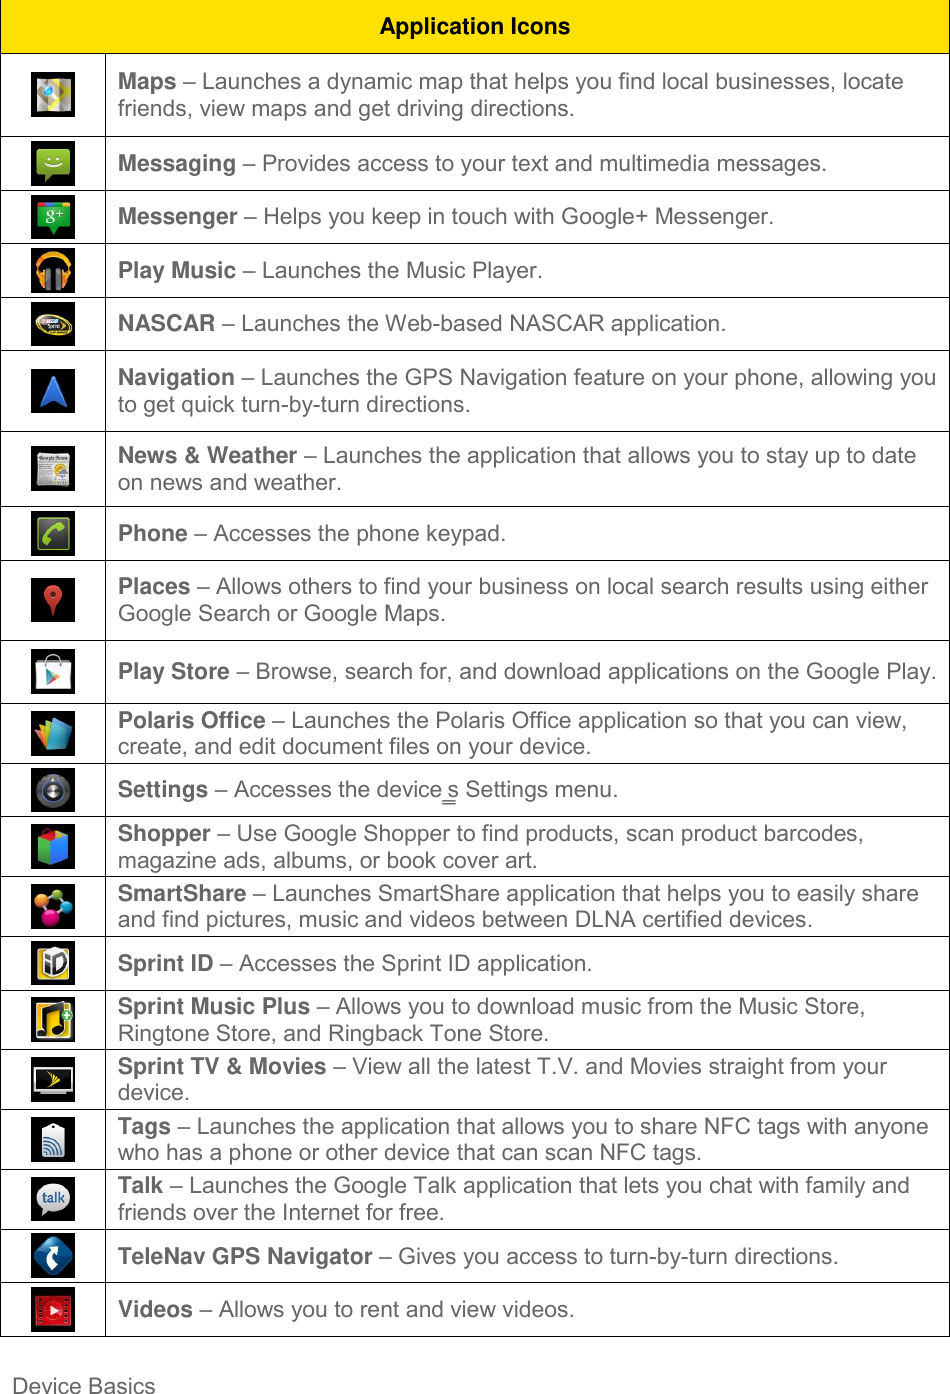 Device Basics     Application Icons  Maps – Launches a dynamic map that helps you find local businesses, locate friends, view maps and get driving directions.  Messaging – Provides access to your text and multimedia messages.  Messenger – Helps you keep in touch with Google+ Messenger.  Play Music – Launches the Music Player.  NASCAR – Launches the Web-based NASCAR application.  Navigation – Launches the GPS Navigation feature on your phone, allowing you to get quick turn-by-turn directions.  News &amp; Weather – Launches the application that allows you to stay up to date on news and weather.  Phone – Accesses the phone keypad.  Places – Allows others to find your business on local search results using either Google Search or Google Maps.  Play Store – Browse, search for, and download applications on the Google Play.  Polaris Office – Launches the Polaris Office application so that you can view, create, and edit document files on your device.  Settings – Accesses the device‗s Settings menu.  Shopper – Use Google Shopper to find products, scan product barcodes, magazine ads, albums, or book cover art.  SmartShare – Launches SmartShare application that helps you to easily share and find pictures, music and videos between DLNA certified devices.  Sprint ID – Accesses the Sprint ID application.  Sprint Music Plus – Allows you to download music from the Music Store, Ringtone Store, and Ringback Tone Store.  Sprint TV &amp; Movies – View all the latest T.V. and Movies straight from your device.  Tags – Launches the application that allows you to share NFC tags with anyone who has a phone or other device that can scan NFC tags.  Talk – Launches the Google Talk application that lets you chat with family and friends over the Internet for free.  TeleNav GPS Navigator – Gives you access to turn-by-turn directions.  Videos – Allows you to rent and view videos. 